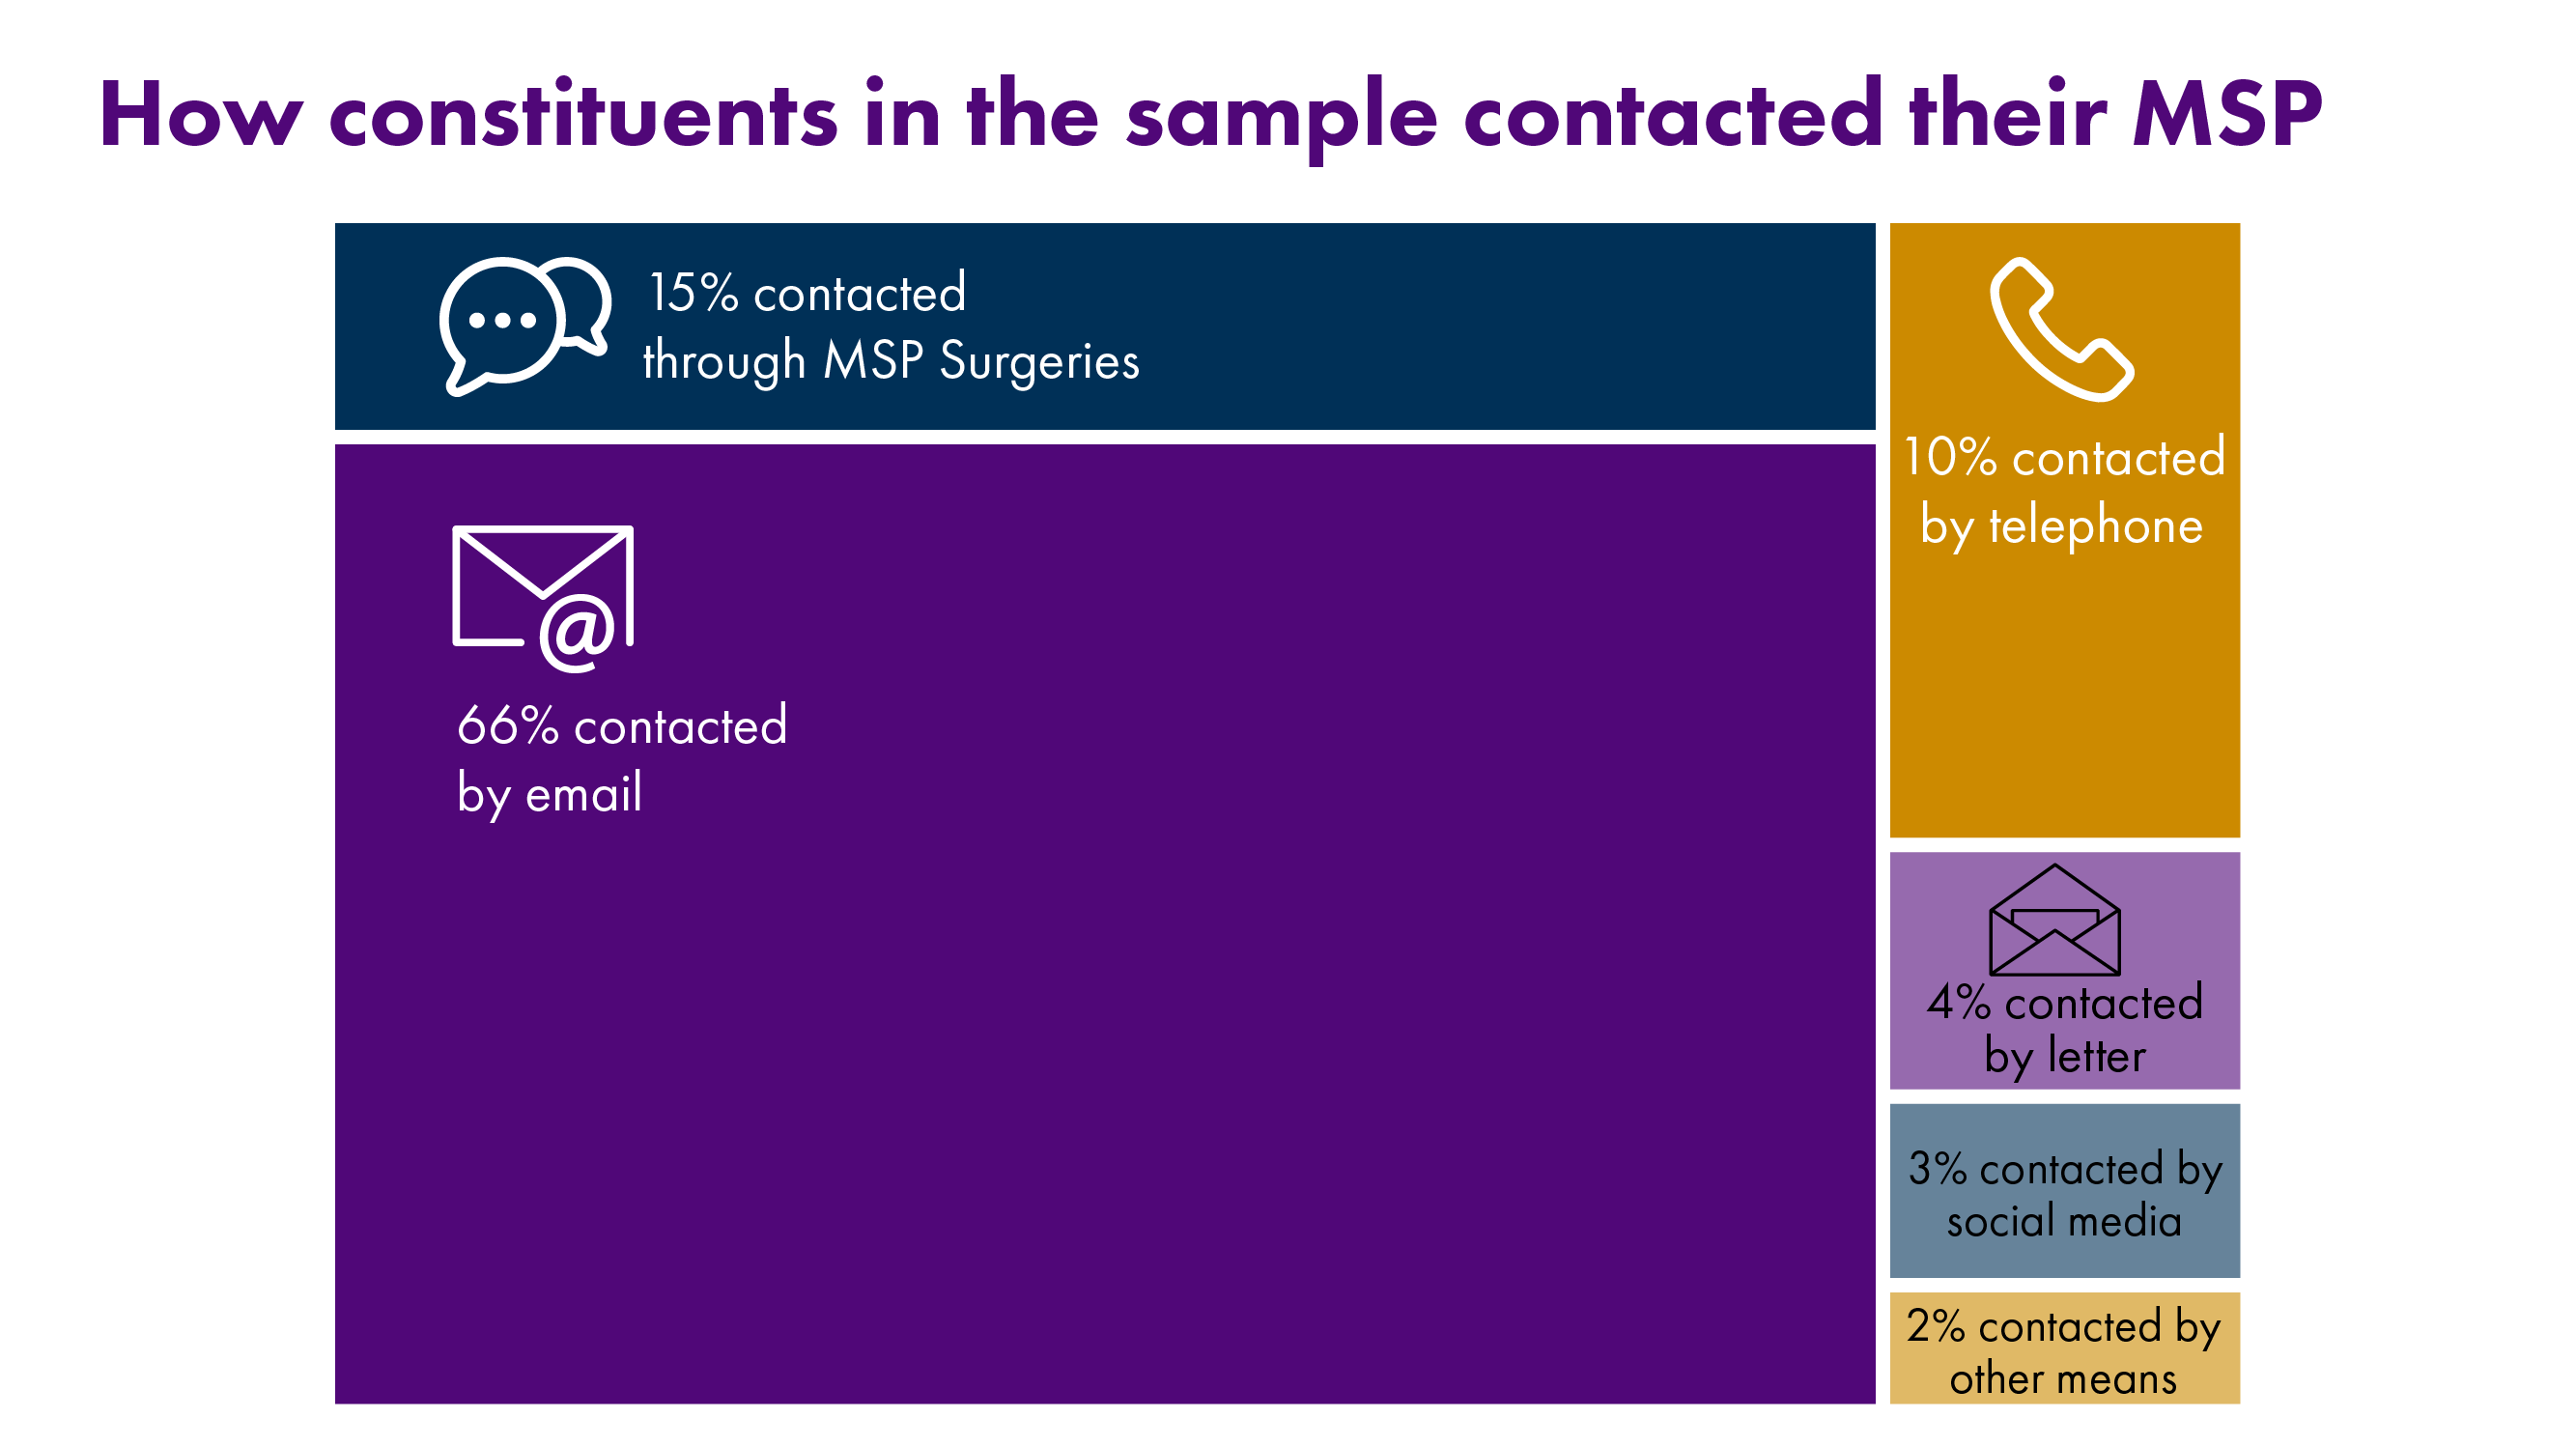 Infographic showing how constituents in the sample contacted their MSP - with 66% of contact by email,  15% through surgeries,  10% by telephone, 4% by letter, 3% by social media and 2% by other means.